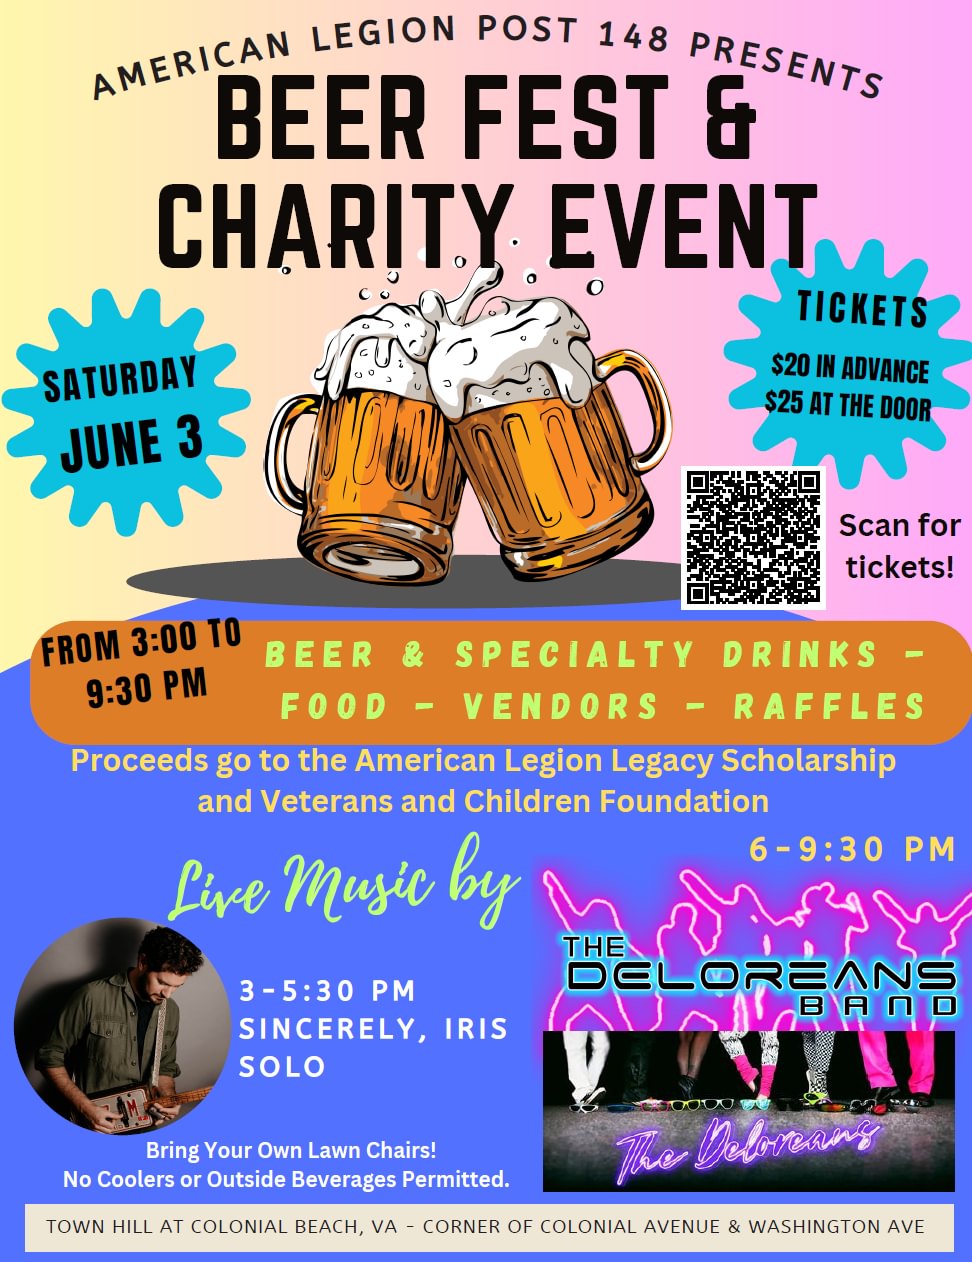 <h1 class="tribe-events-single-event-title">Beer Fest & Charity Event</h1>